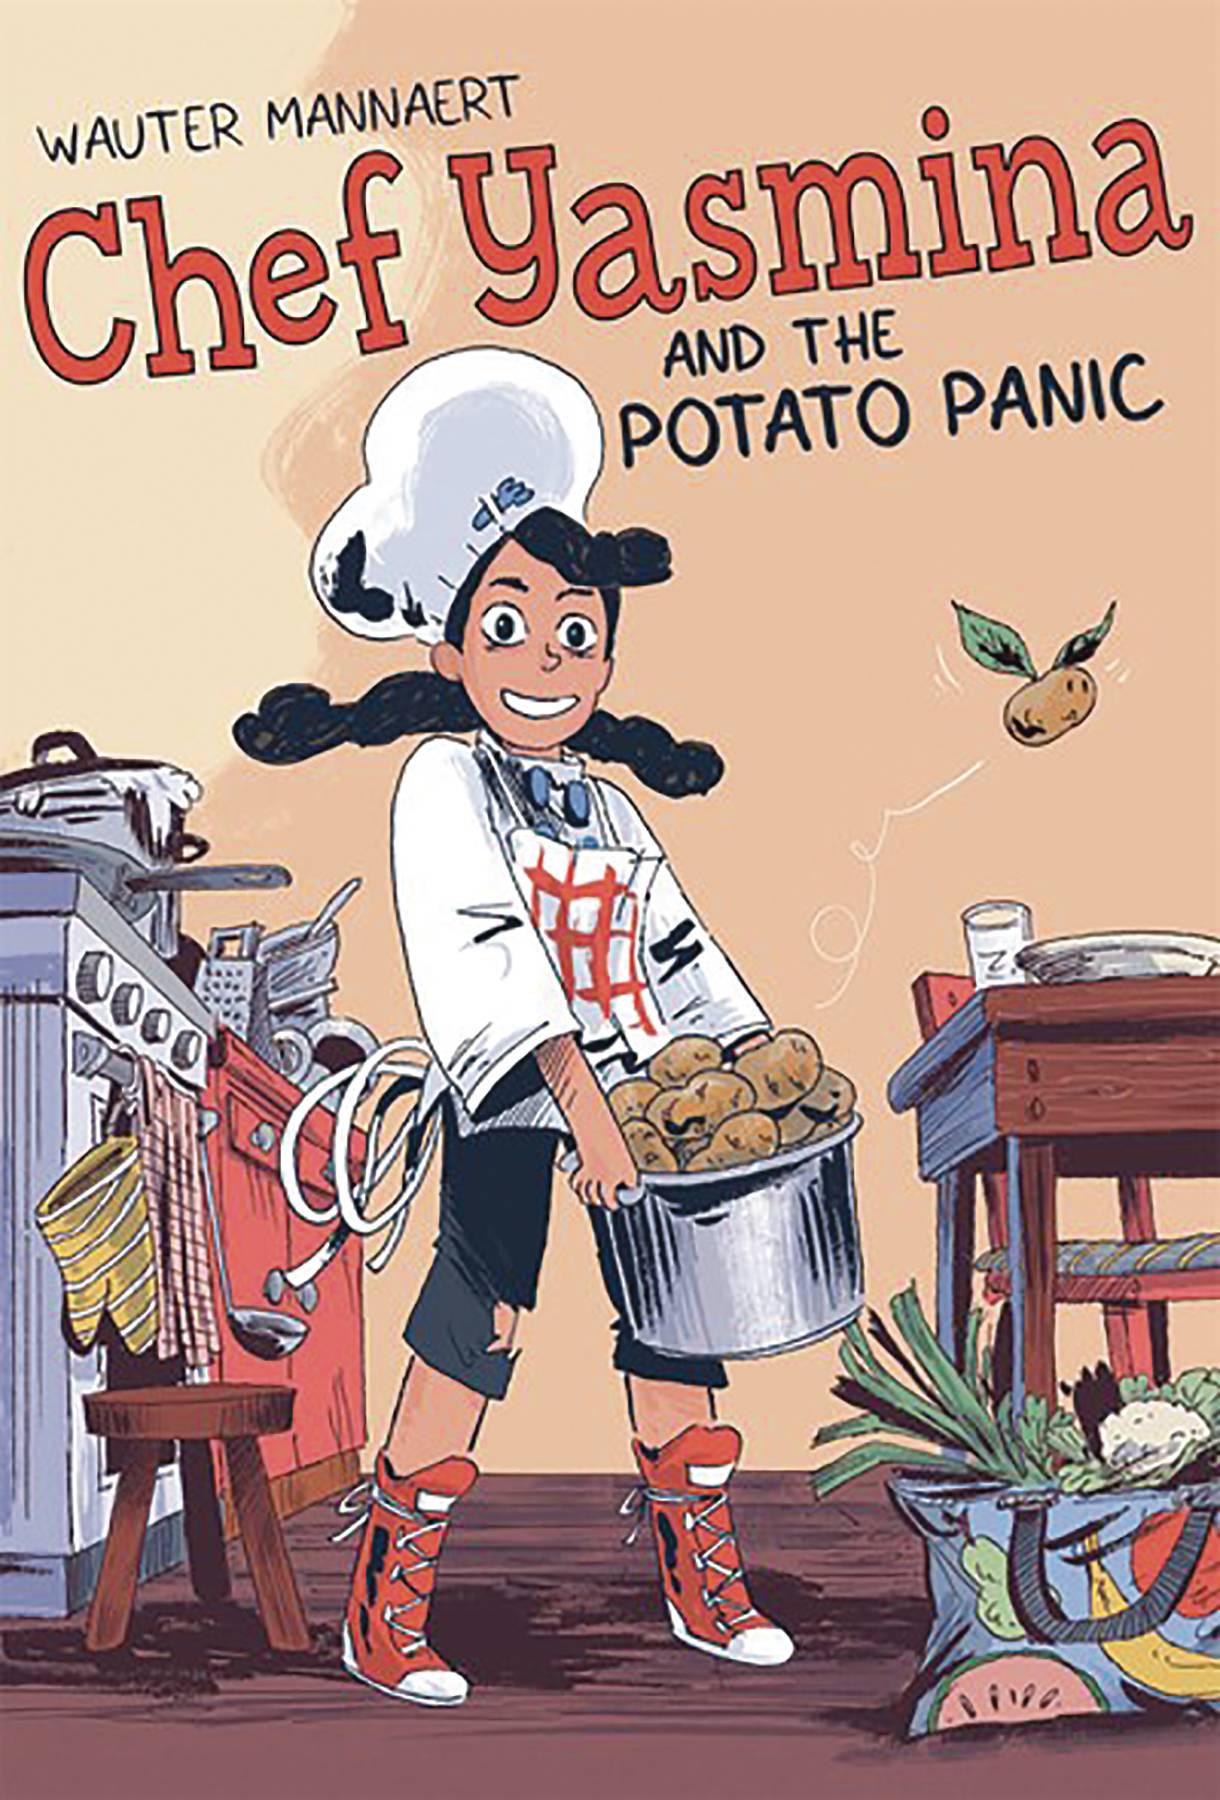 A girl stands in a kitchen, hauling a large pot of potatoes and grinning. She has light brown skin and dark afro hair in two pigtails, and is wearing a chef's hat and jacket over ripped dark shorts and red lace-up boots. One of the potatoes flies out of the pot on leaf wings, with tiny eyes and a tongue poking out.